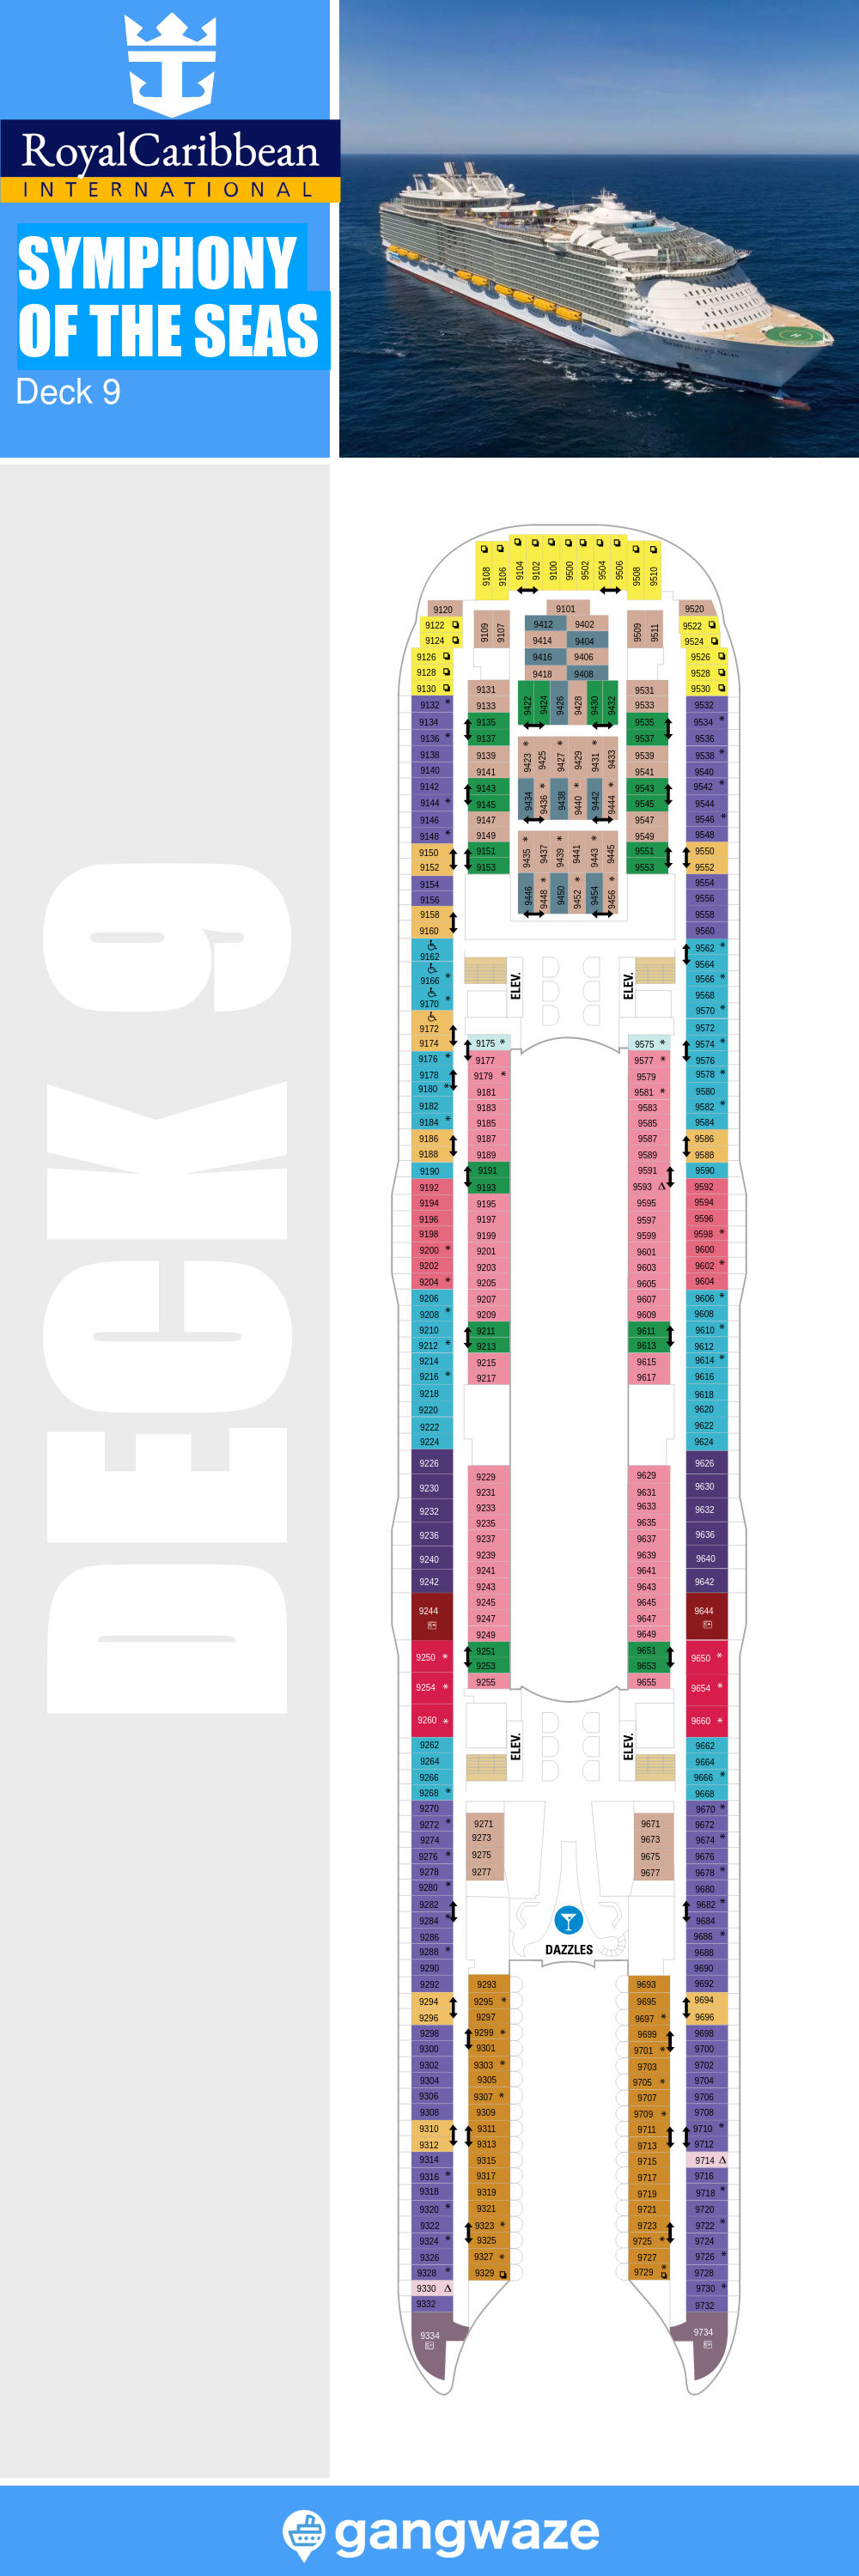 Symphony of the Seas Deck 9 Activities & Deck Plan Layout